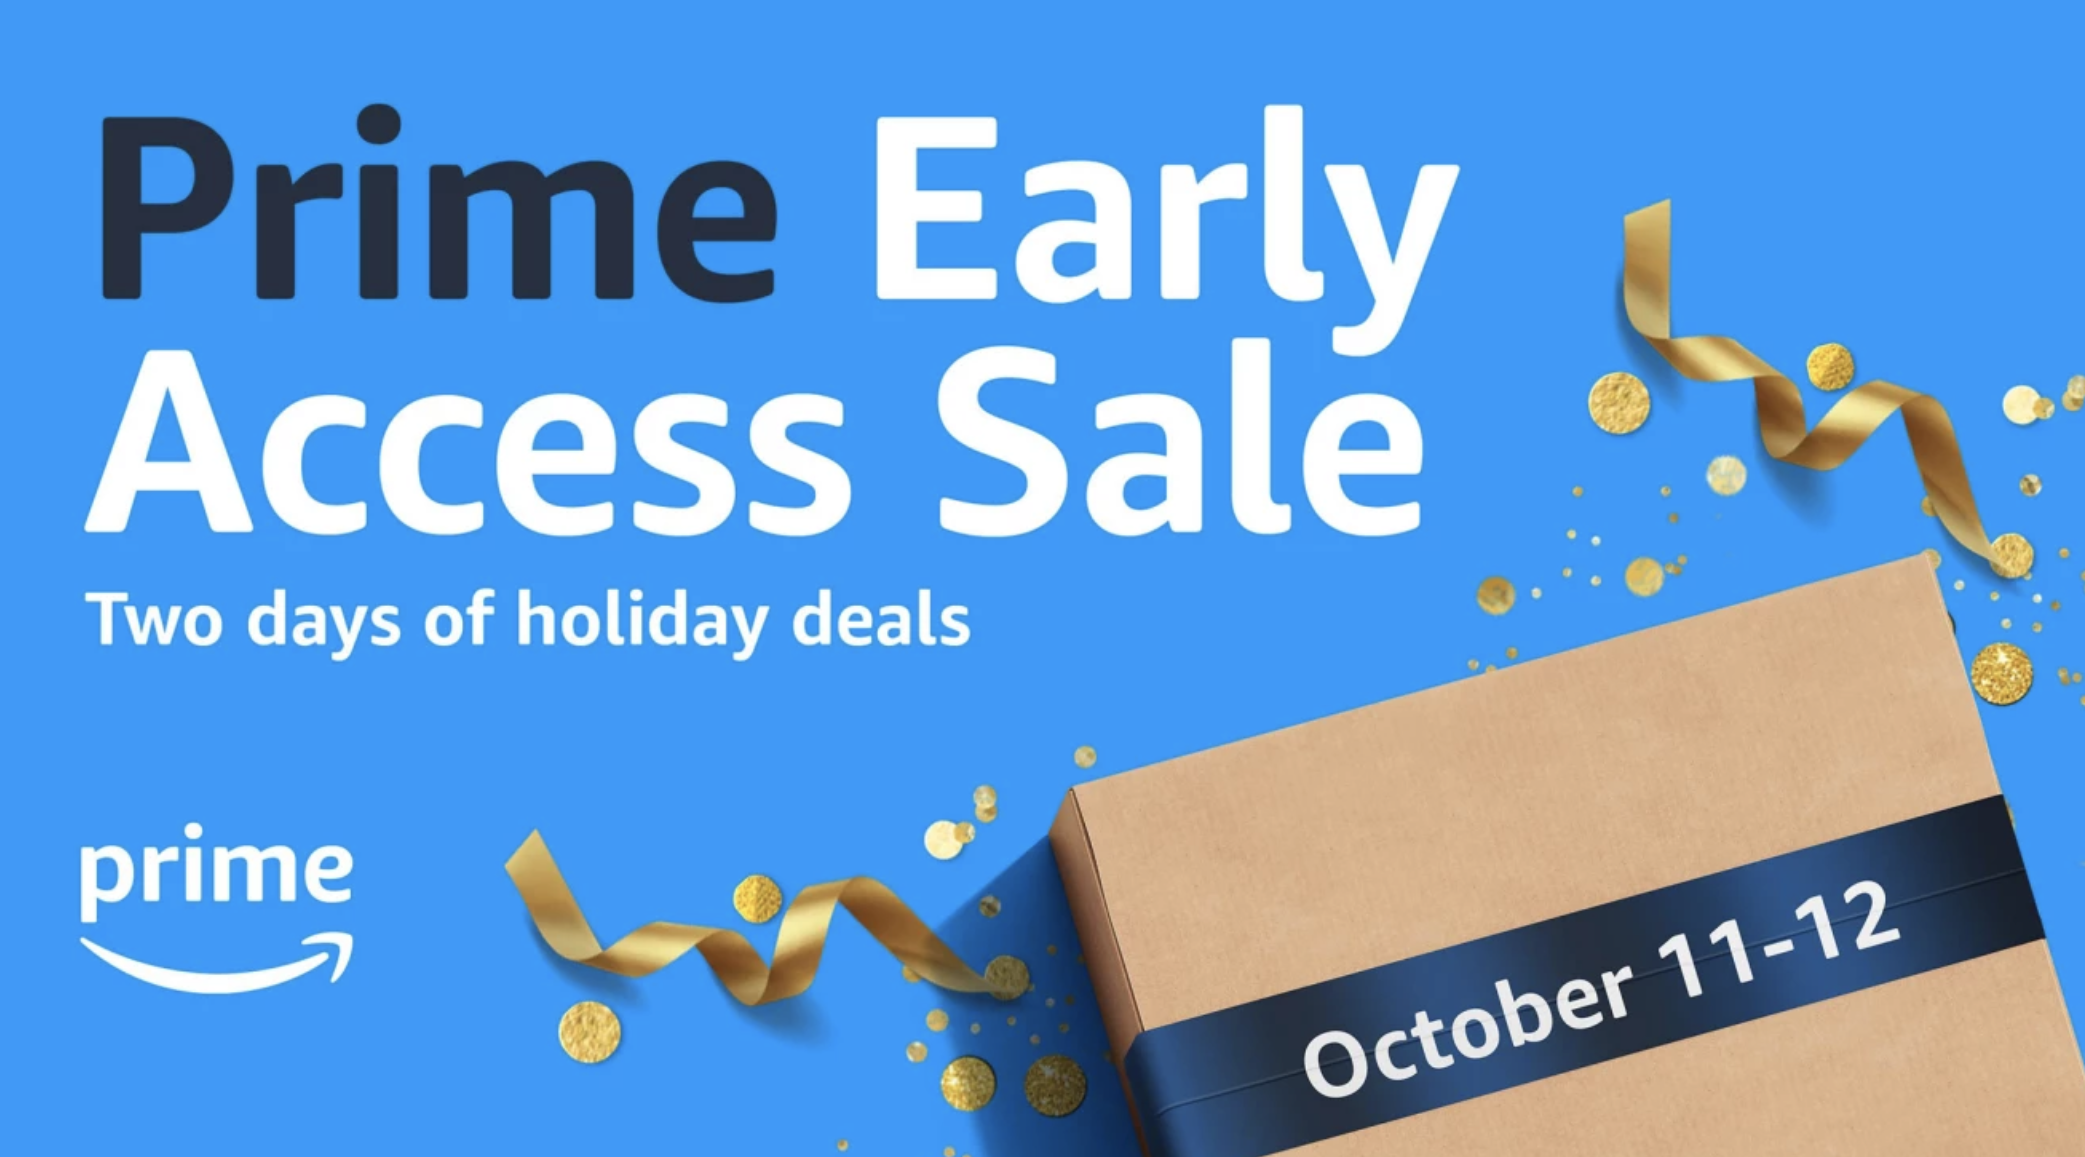 Prime Early Access Sale 